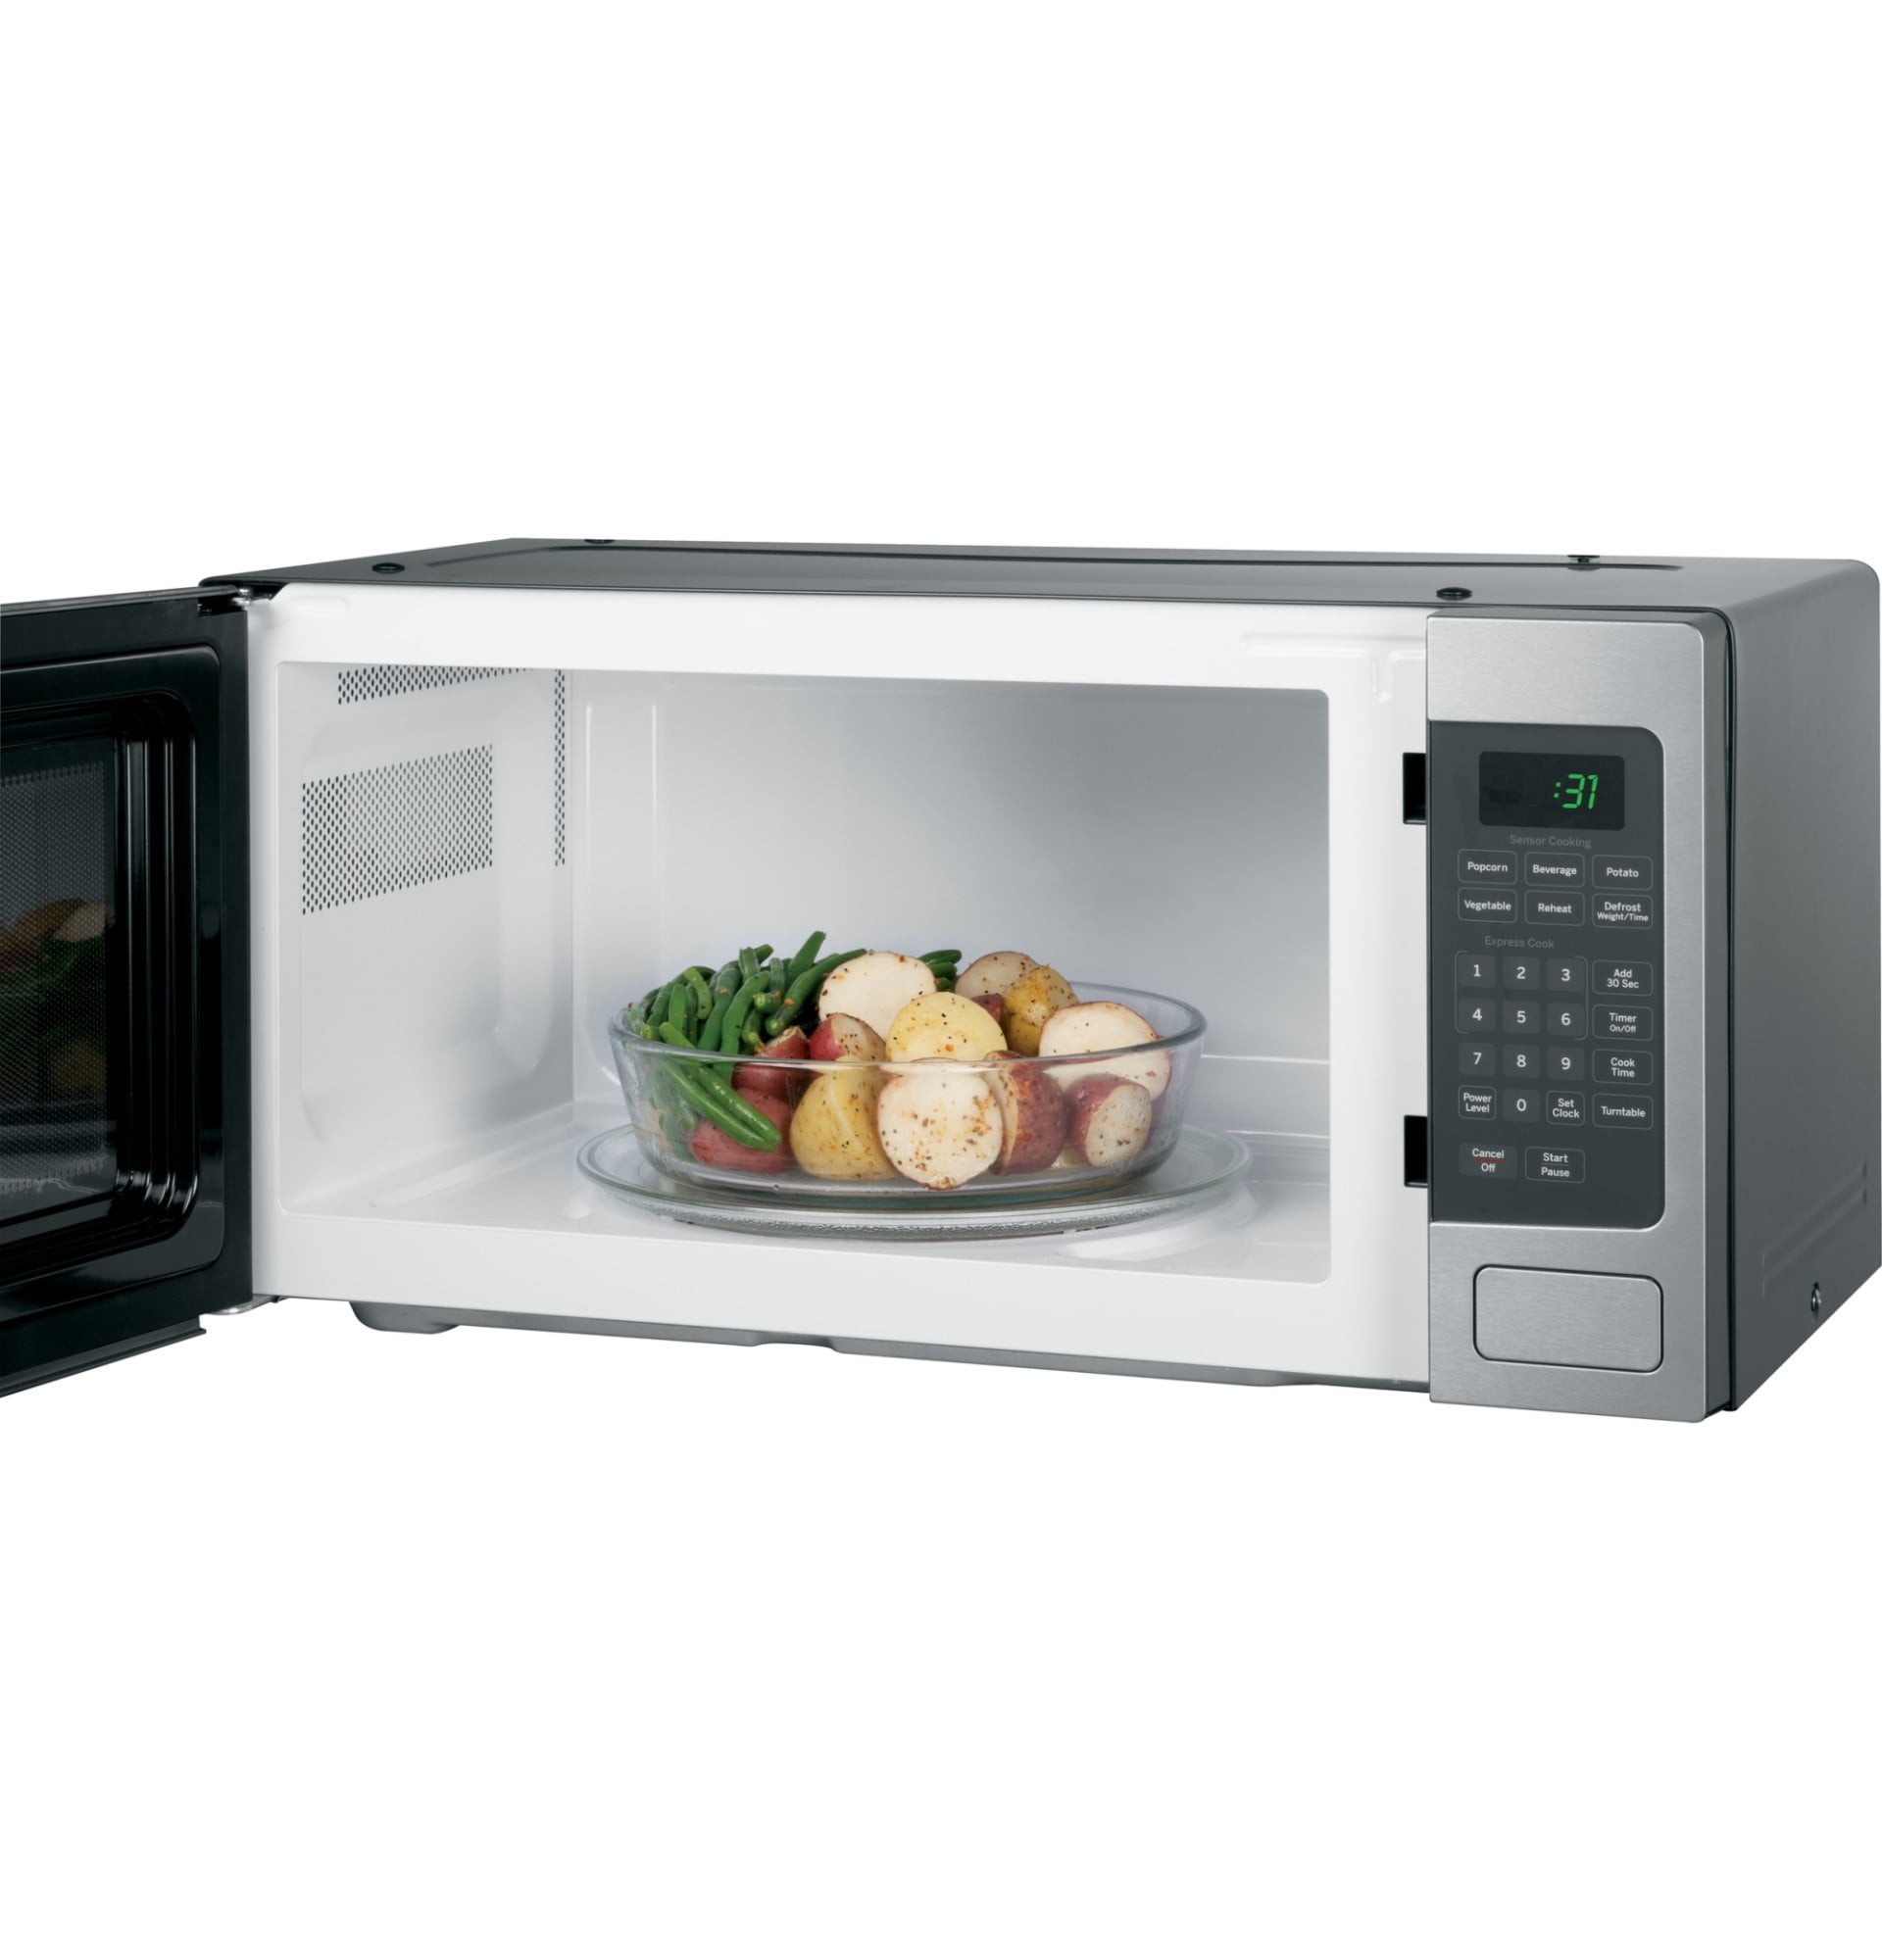 JES1145DLWW in White by GE Appliances in Bangor, ME - GE® 1.1 Cu. Ft.  Capacity Countertop Microwave Oven